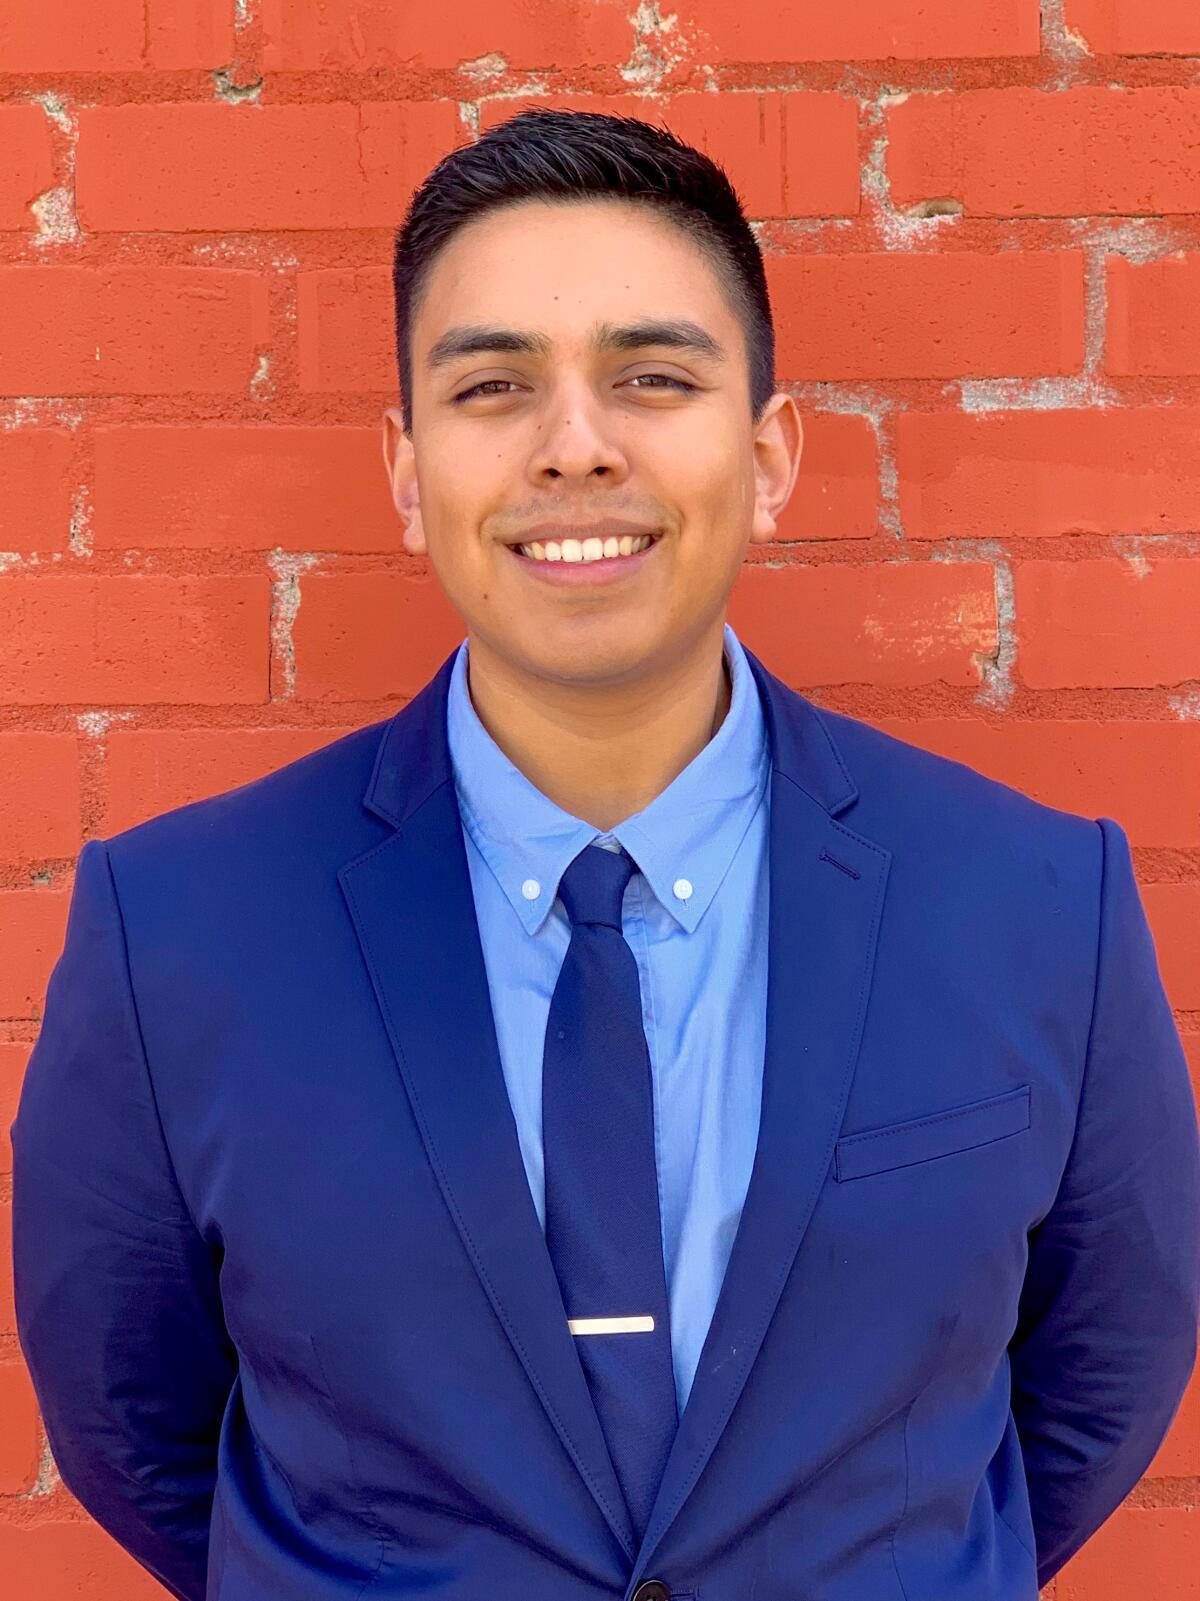 Bryan Osorio, 24, was elected to the City Counil of Delano, Calif., in 2018. 